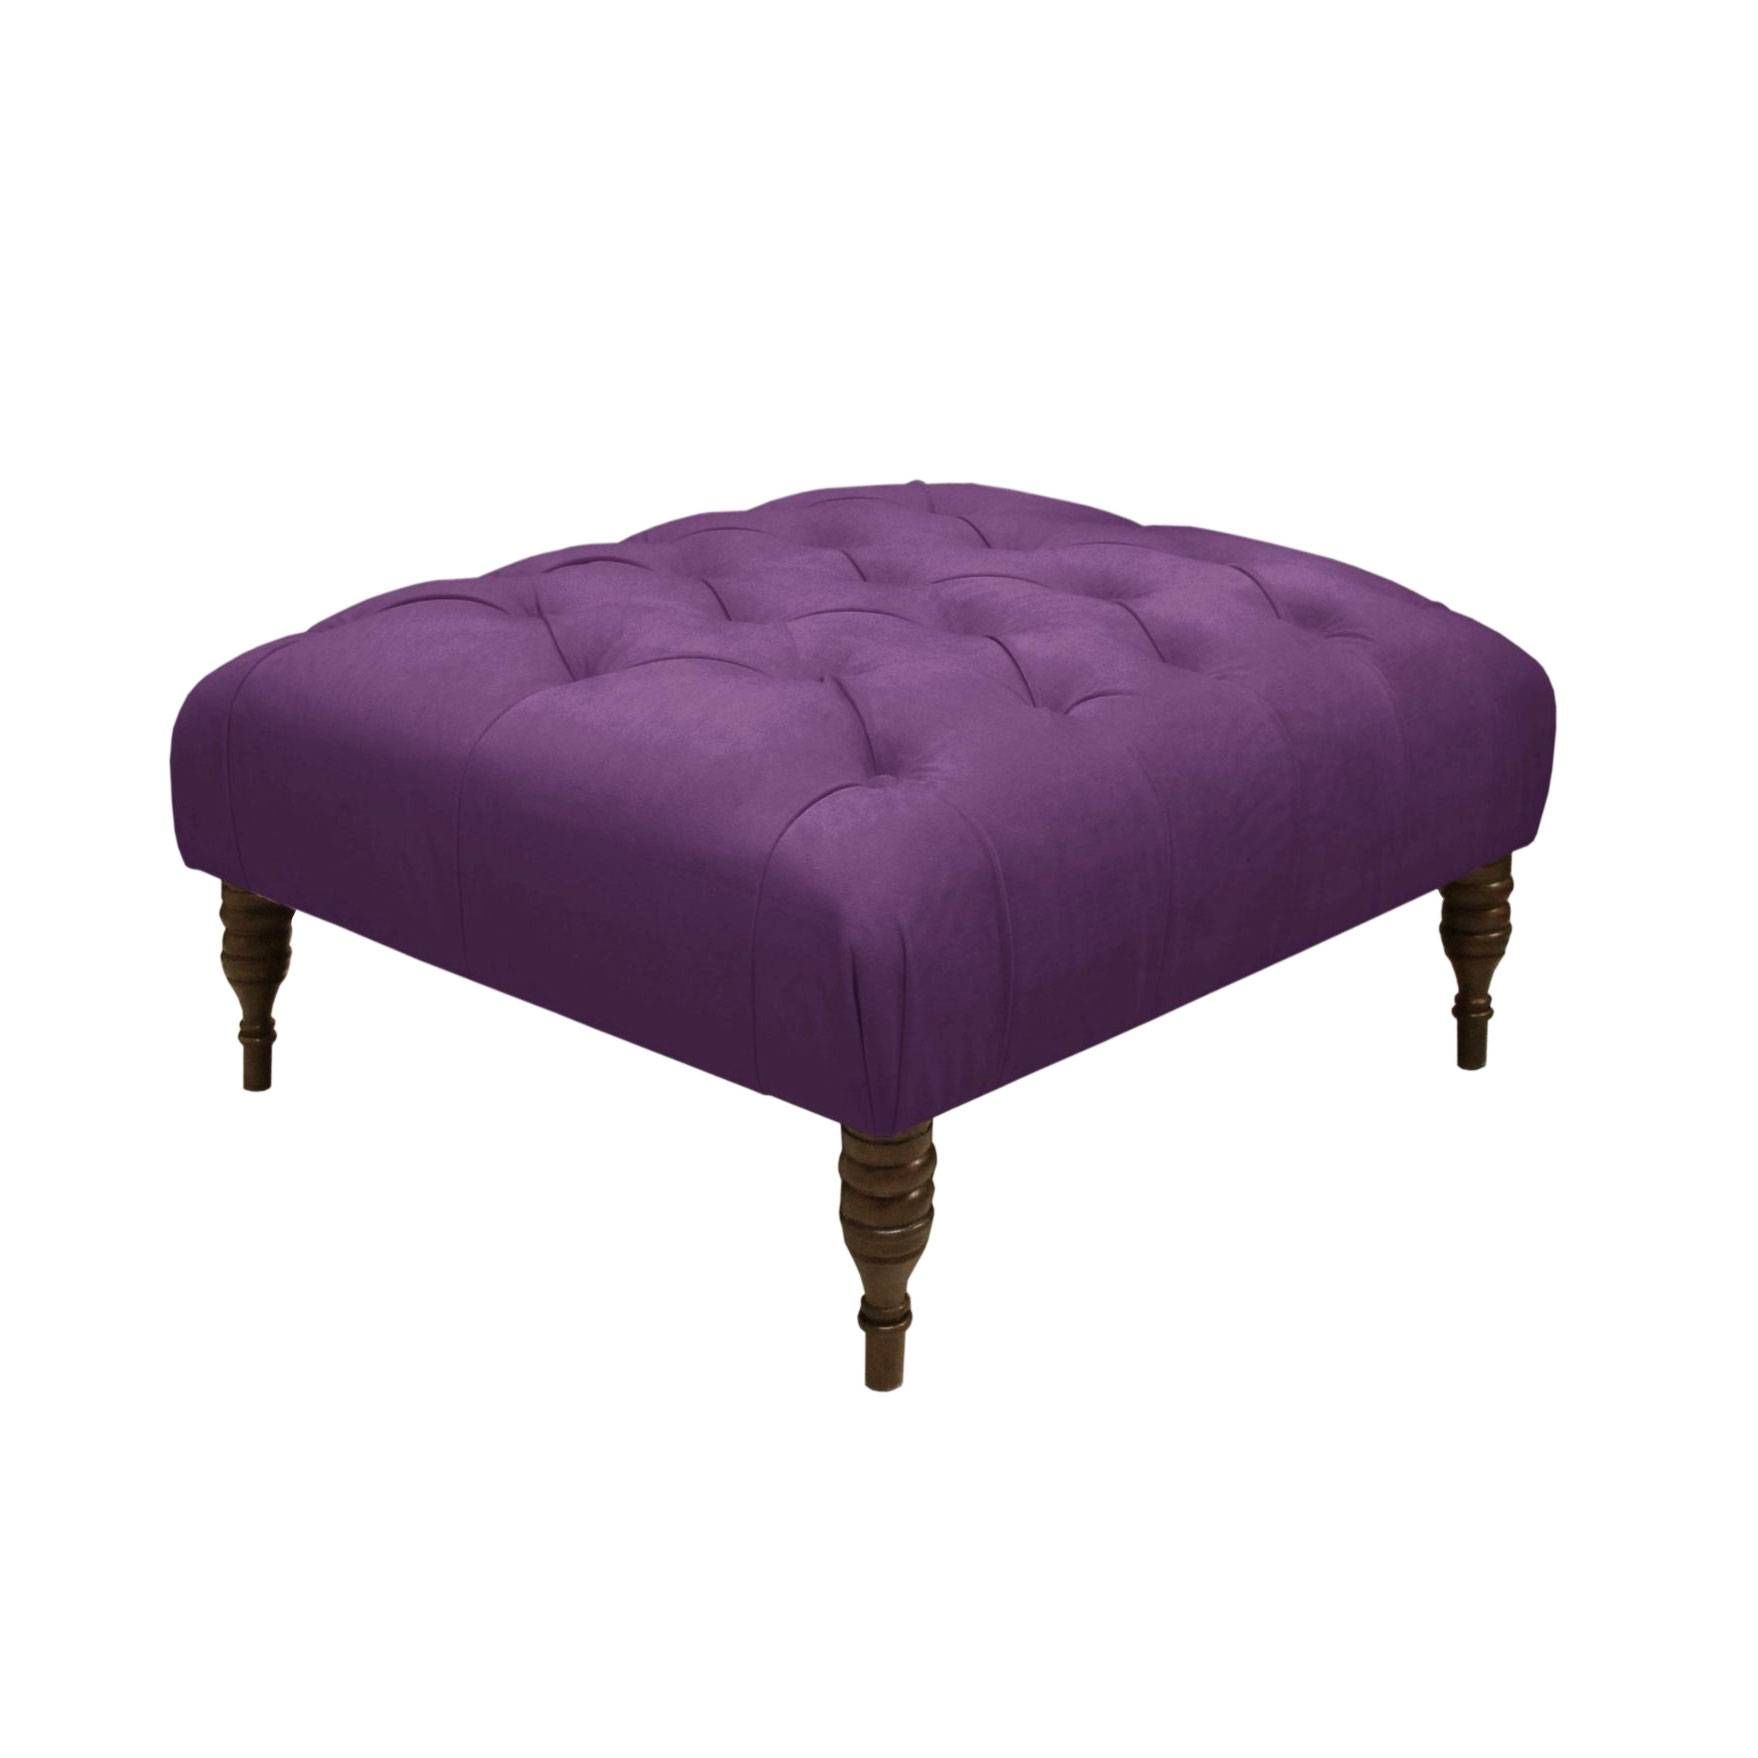 Furniture: Elegant Design Of Pier One Ottoman For Living Room With Regard To Purple Ottoman Coffee Tables (View 1 of 30)